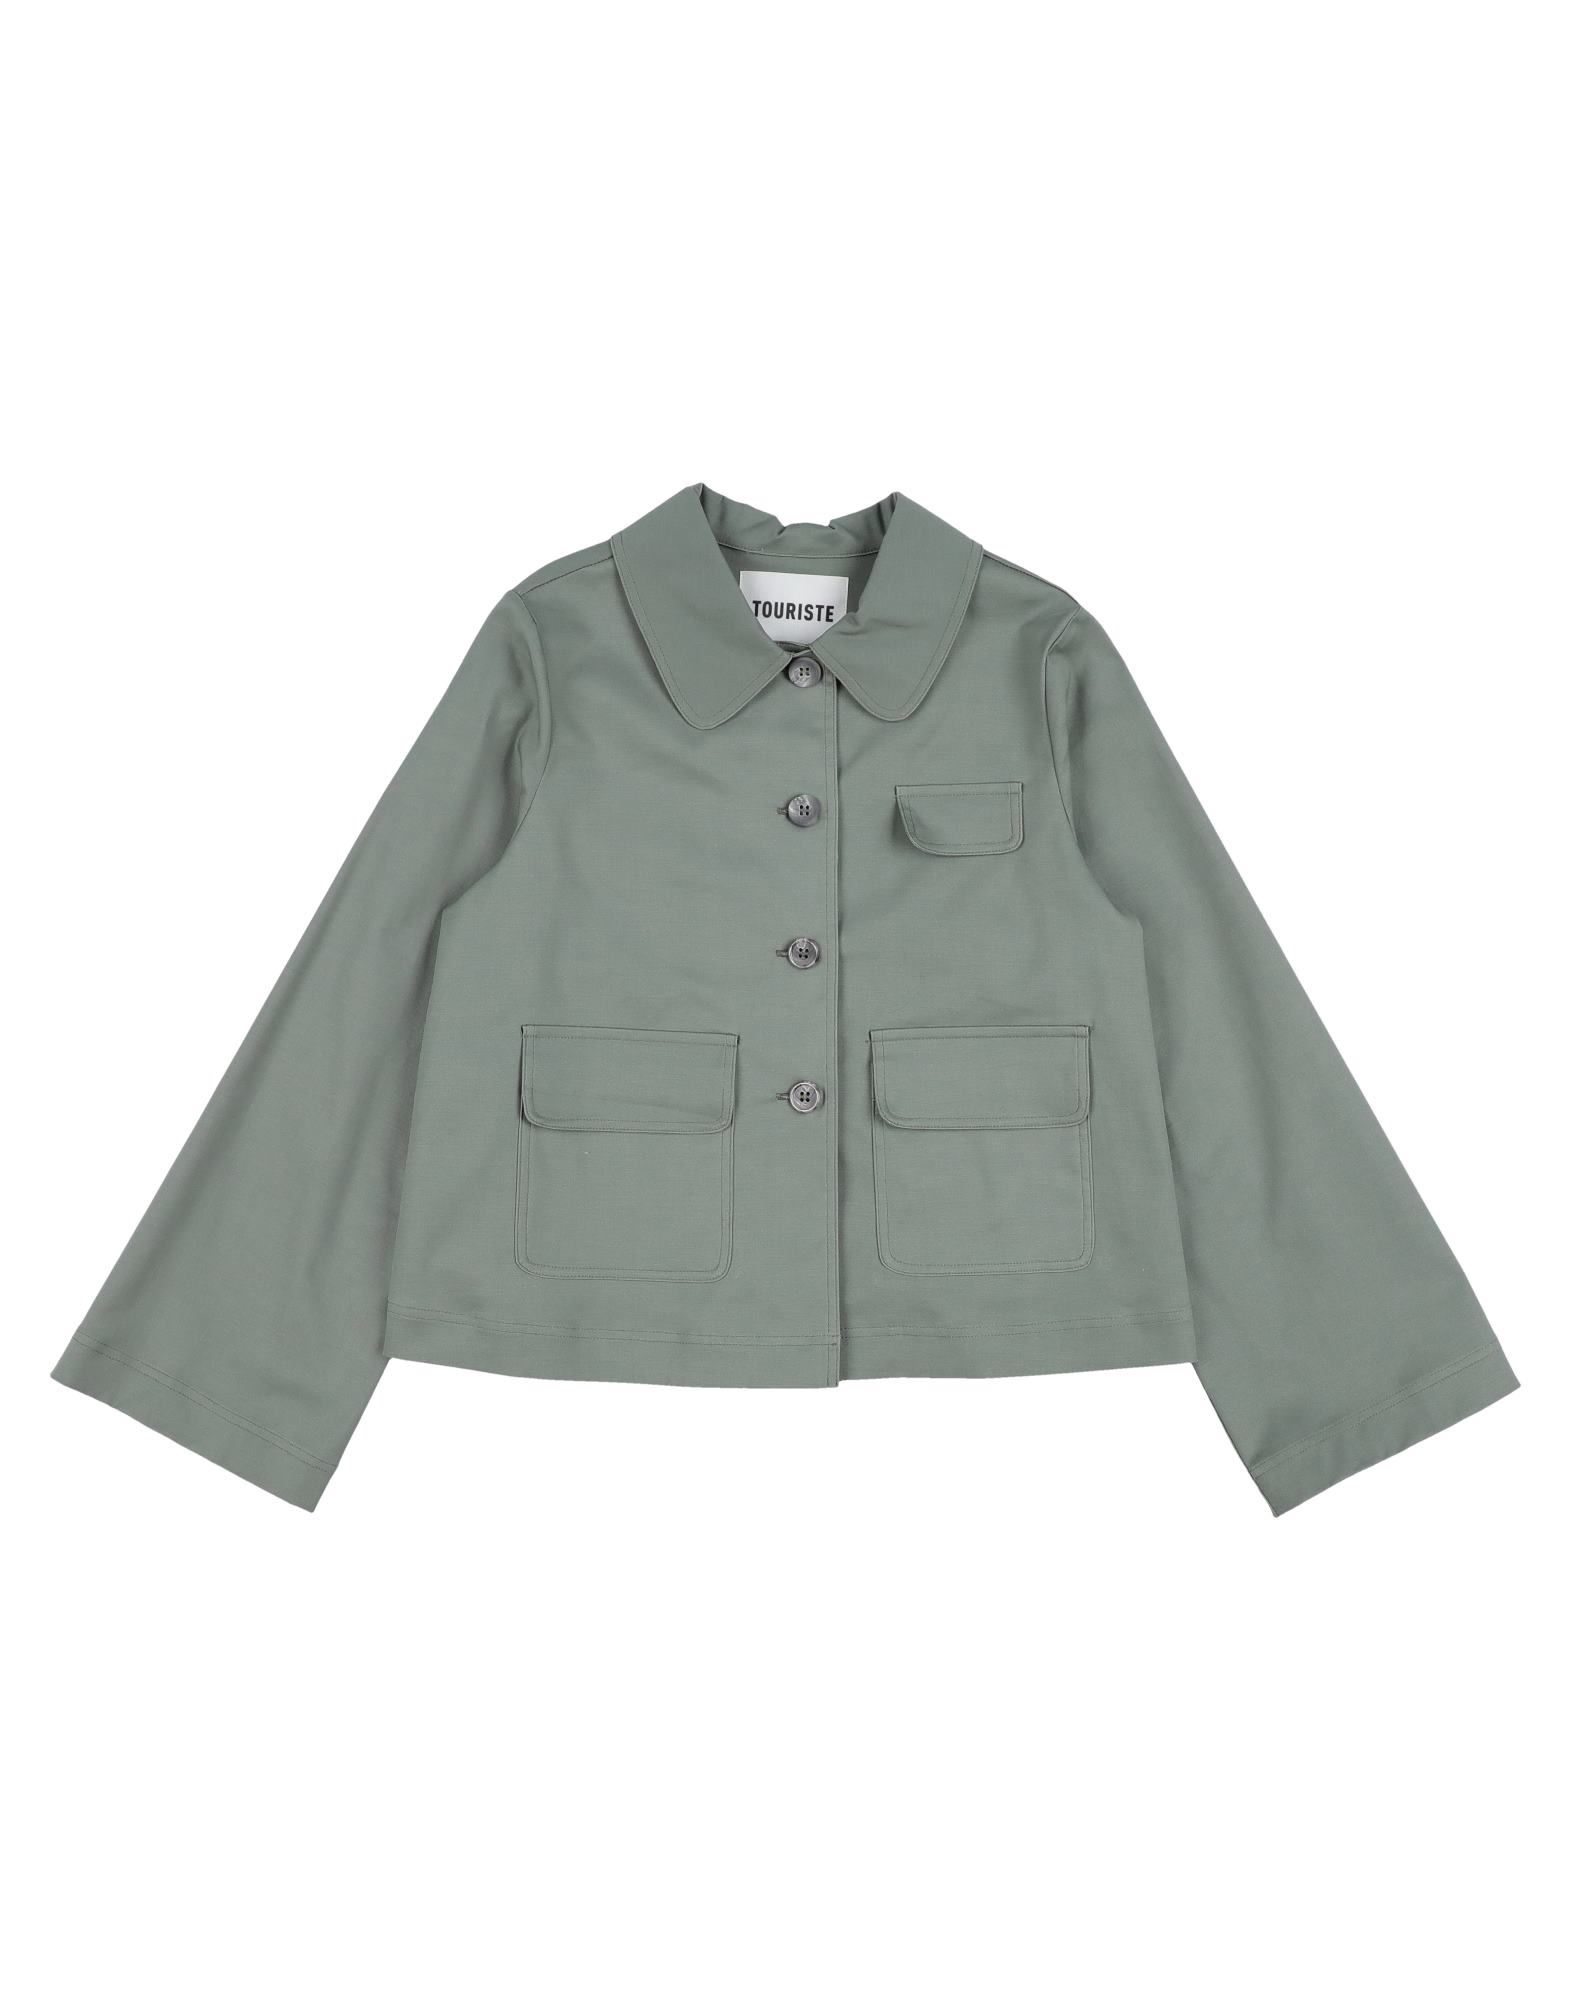 Touriste Kids' Suit Jackets In Military Green